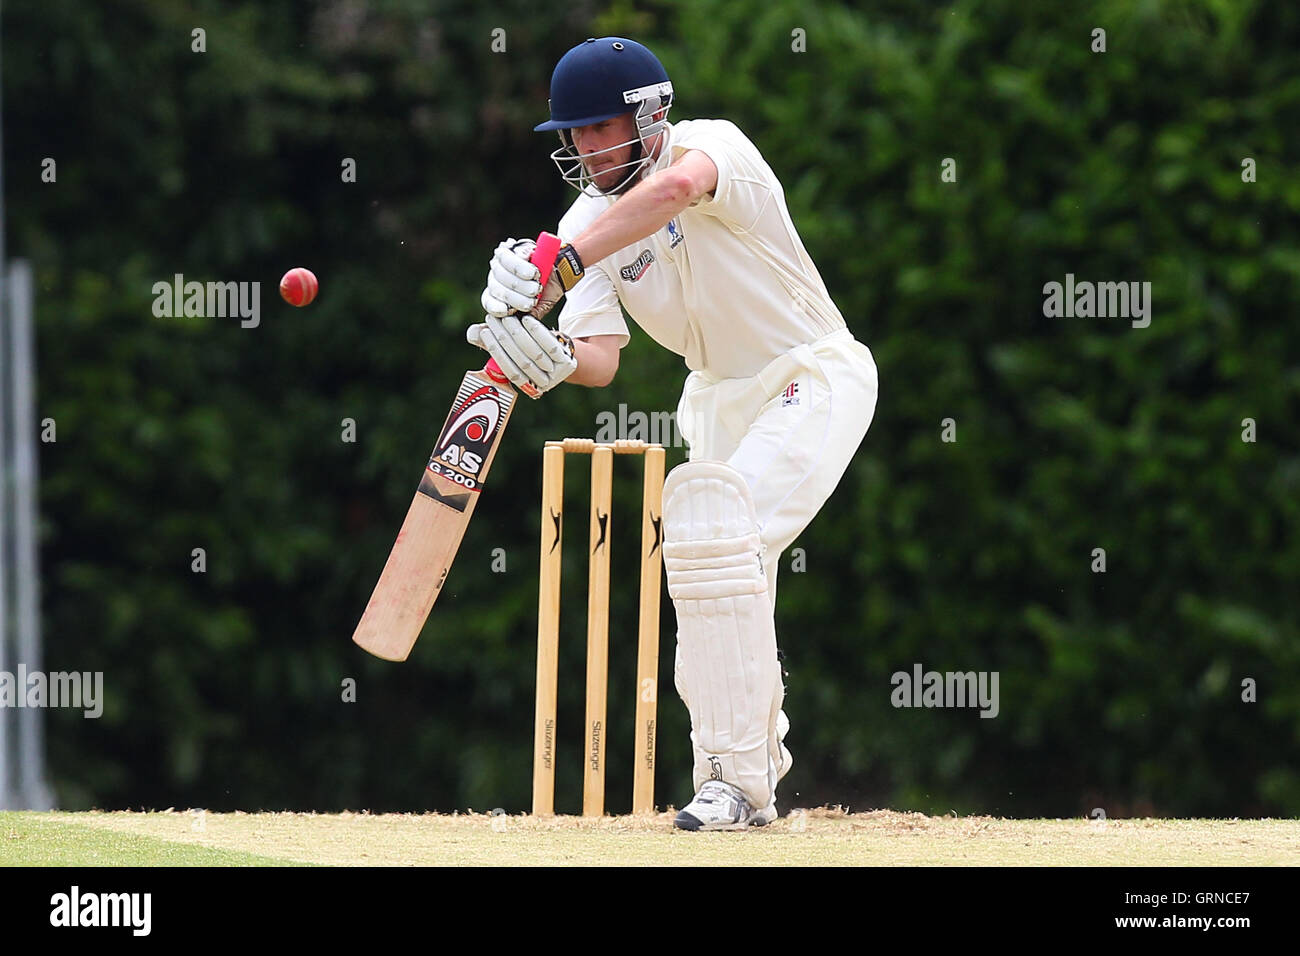 Jamie Walton in batting action for Shenfield - Shenfield CC vs Upminster CC - Essex Cricket League - 21/06/14 Stock Photo